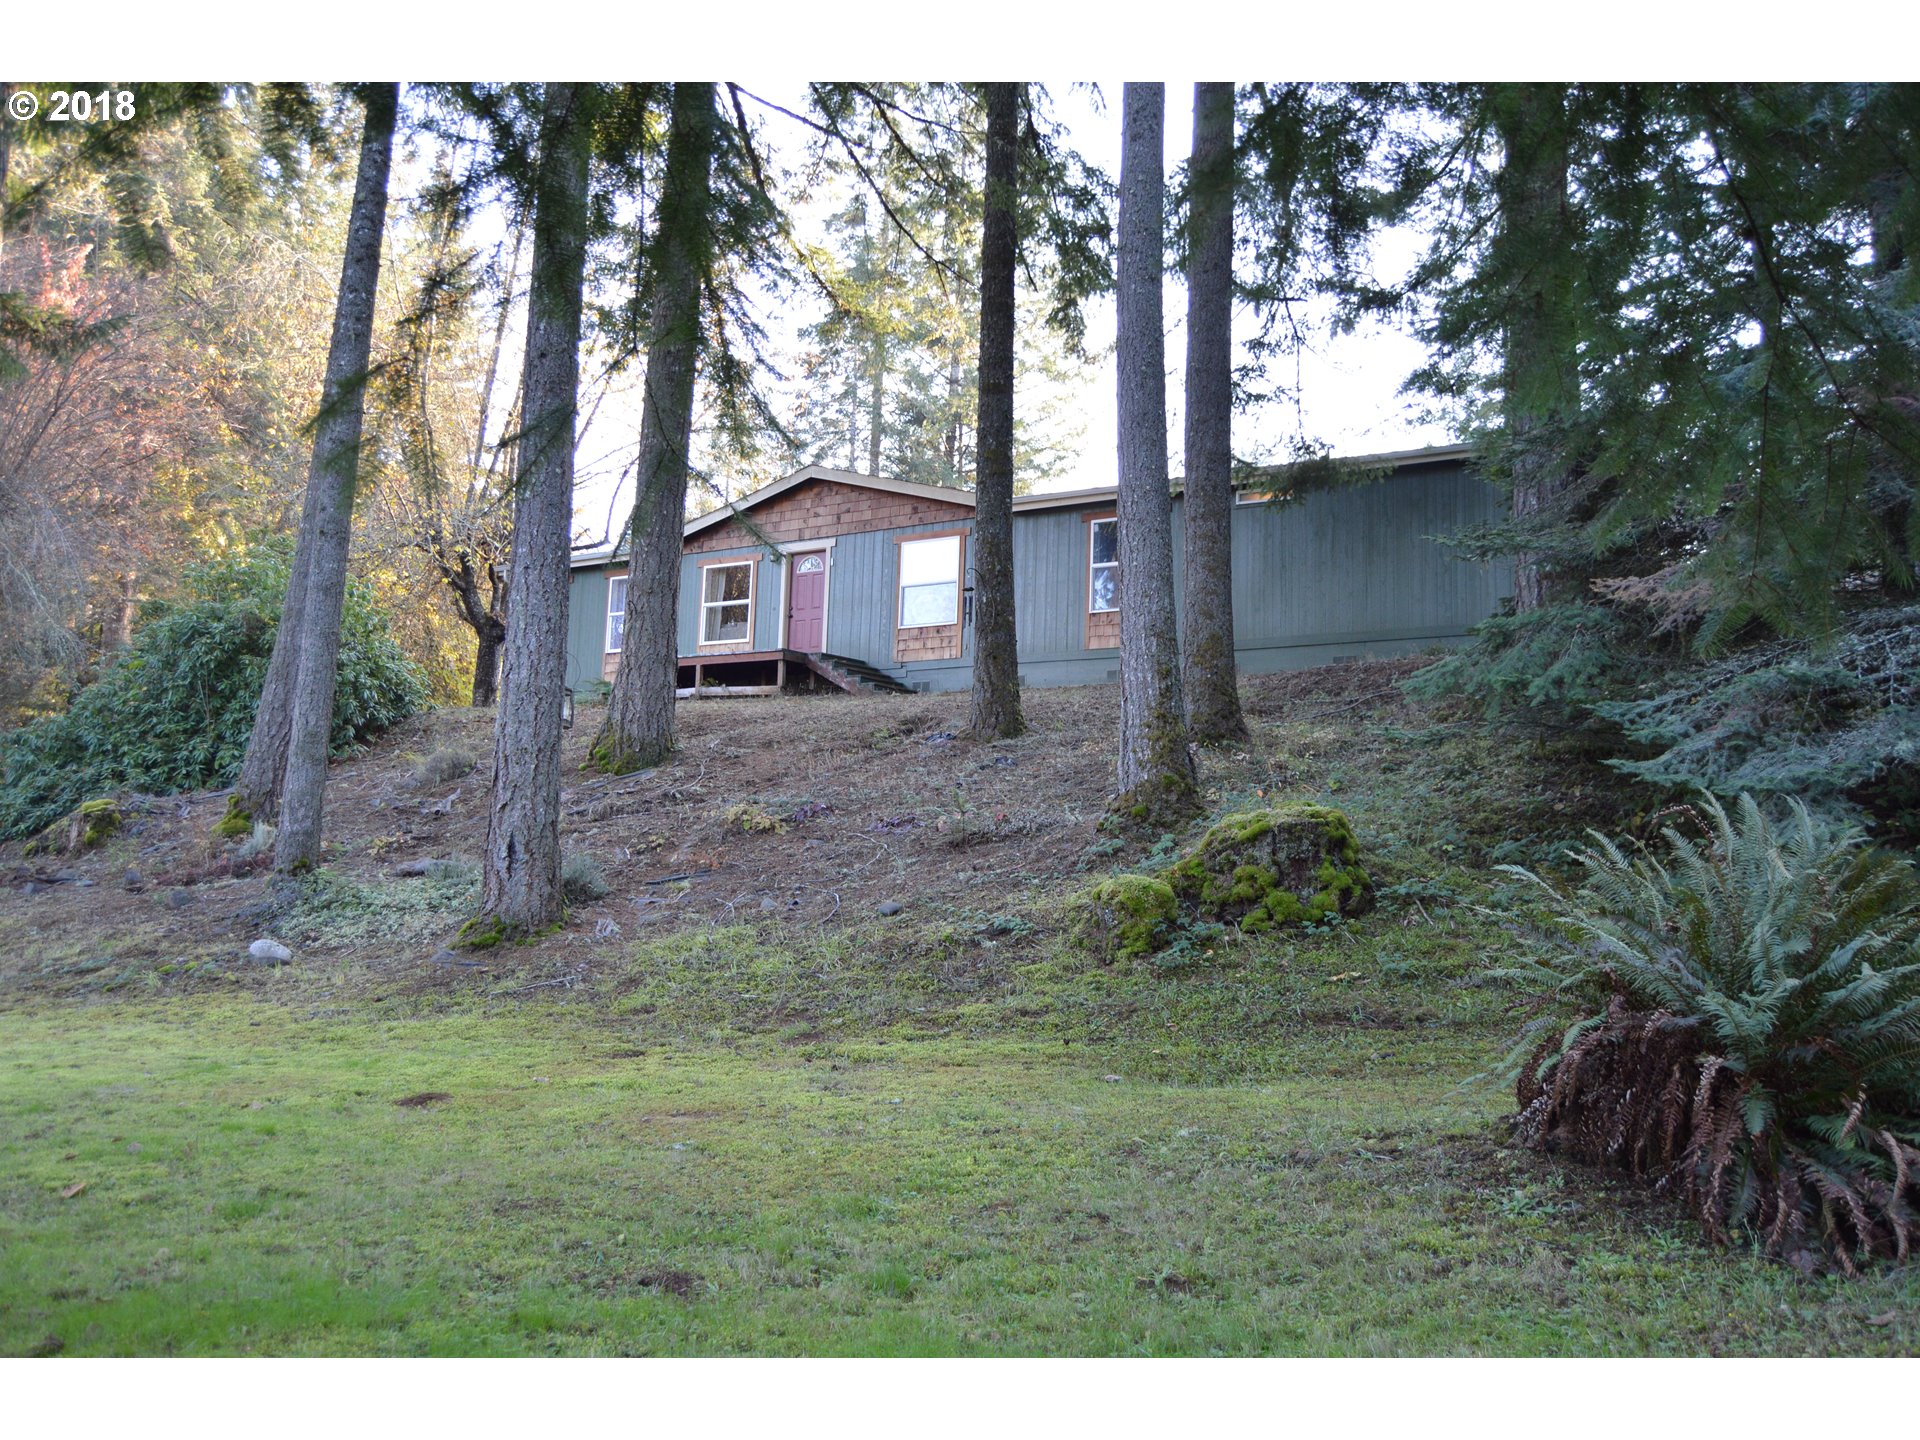 31200 Kenady Ln Cottage Grove Or 97424 Us Eugene Home For